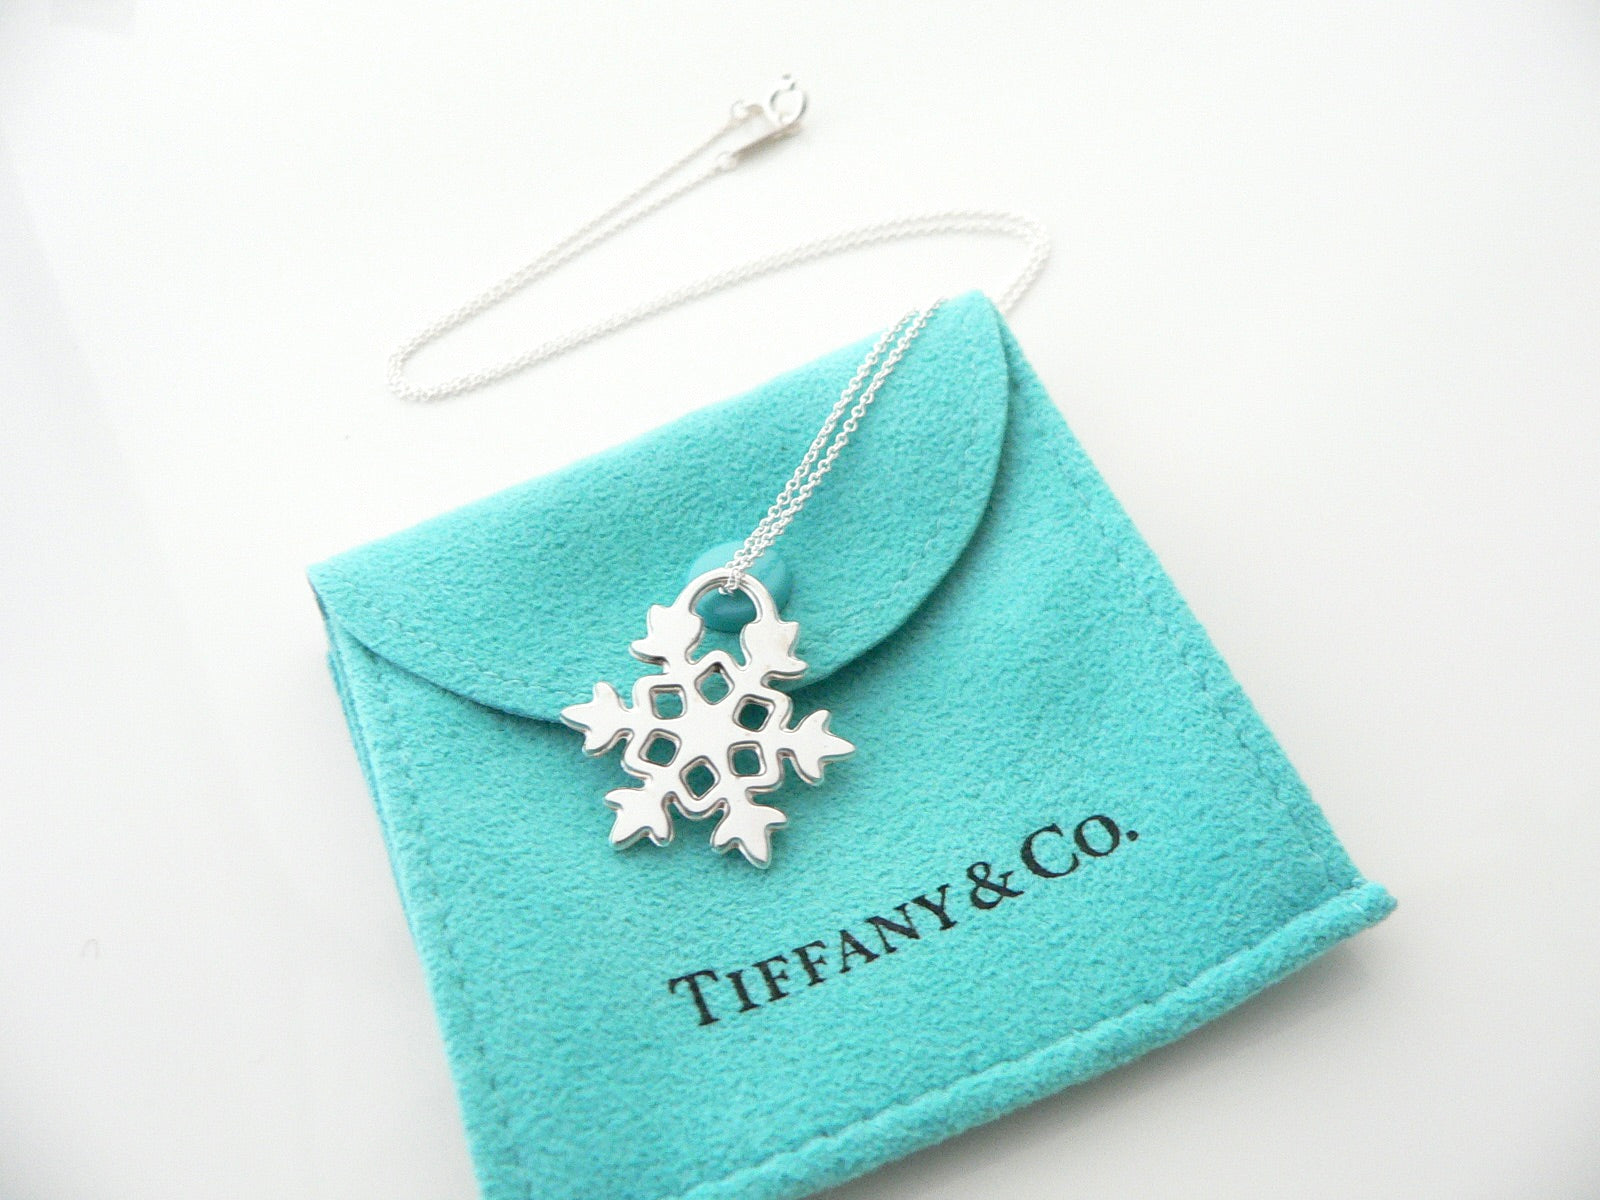 Tiffany & Co Silver Snowflake Charm Necklace Pendant Chain Snow Winter Gift Love